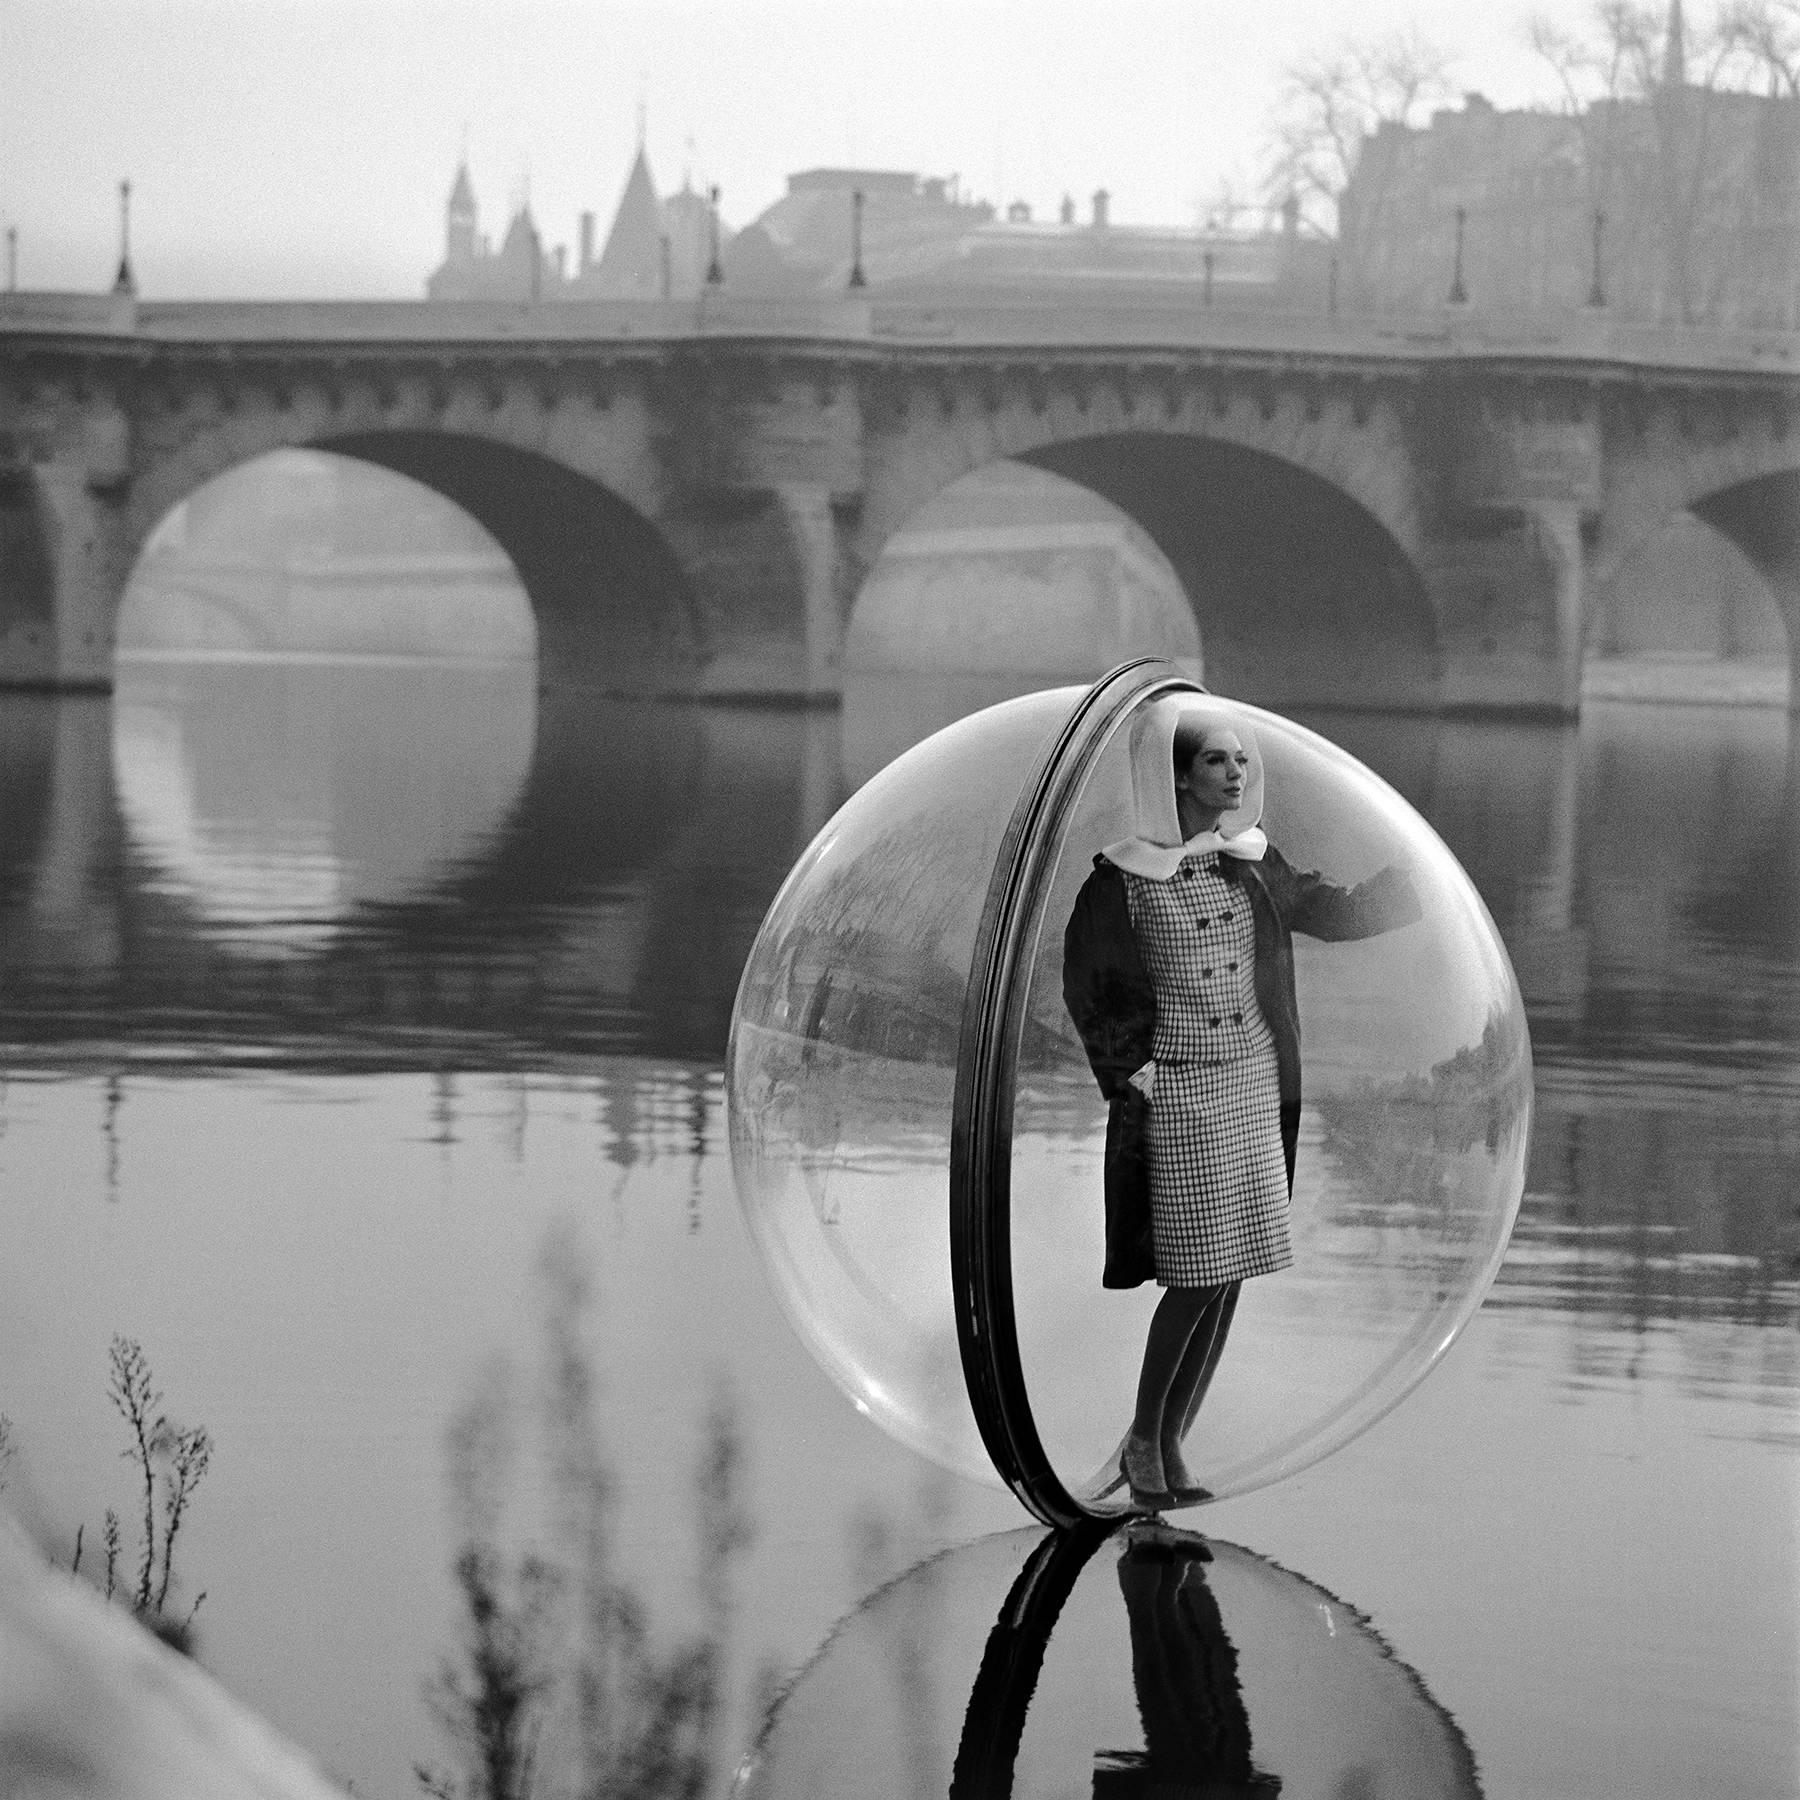 On the Seine - Melvin Sokolsky (Black and White Photography)
Signed on photographer's label on reverse of mount
Archival pigment print, mounted on aluminium
30 x 30 inches
from an edition of 25 + 3 APS

Melvin Sokolsky (born 1933) is celebrated as